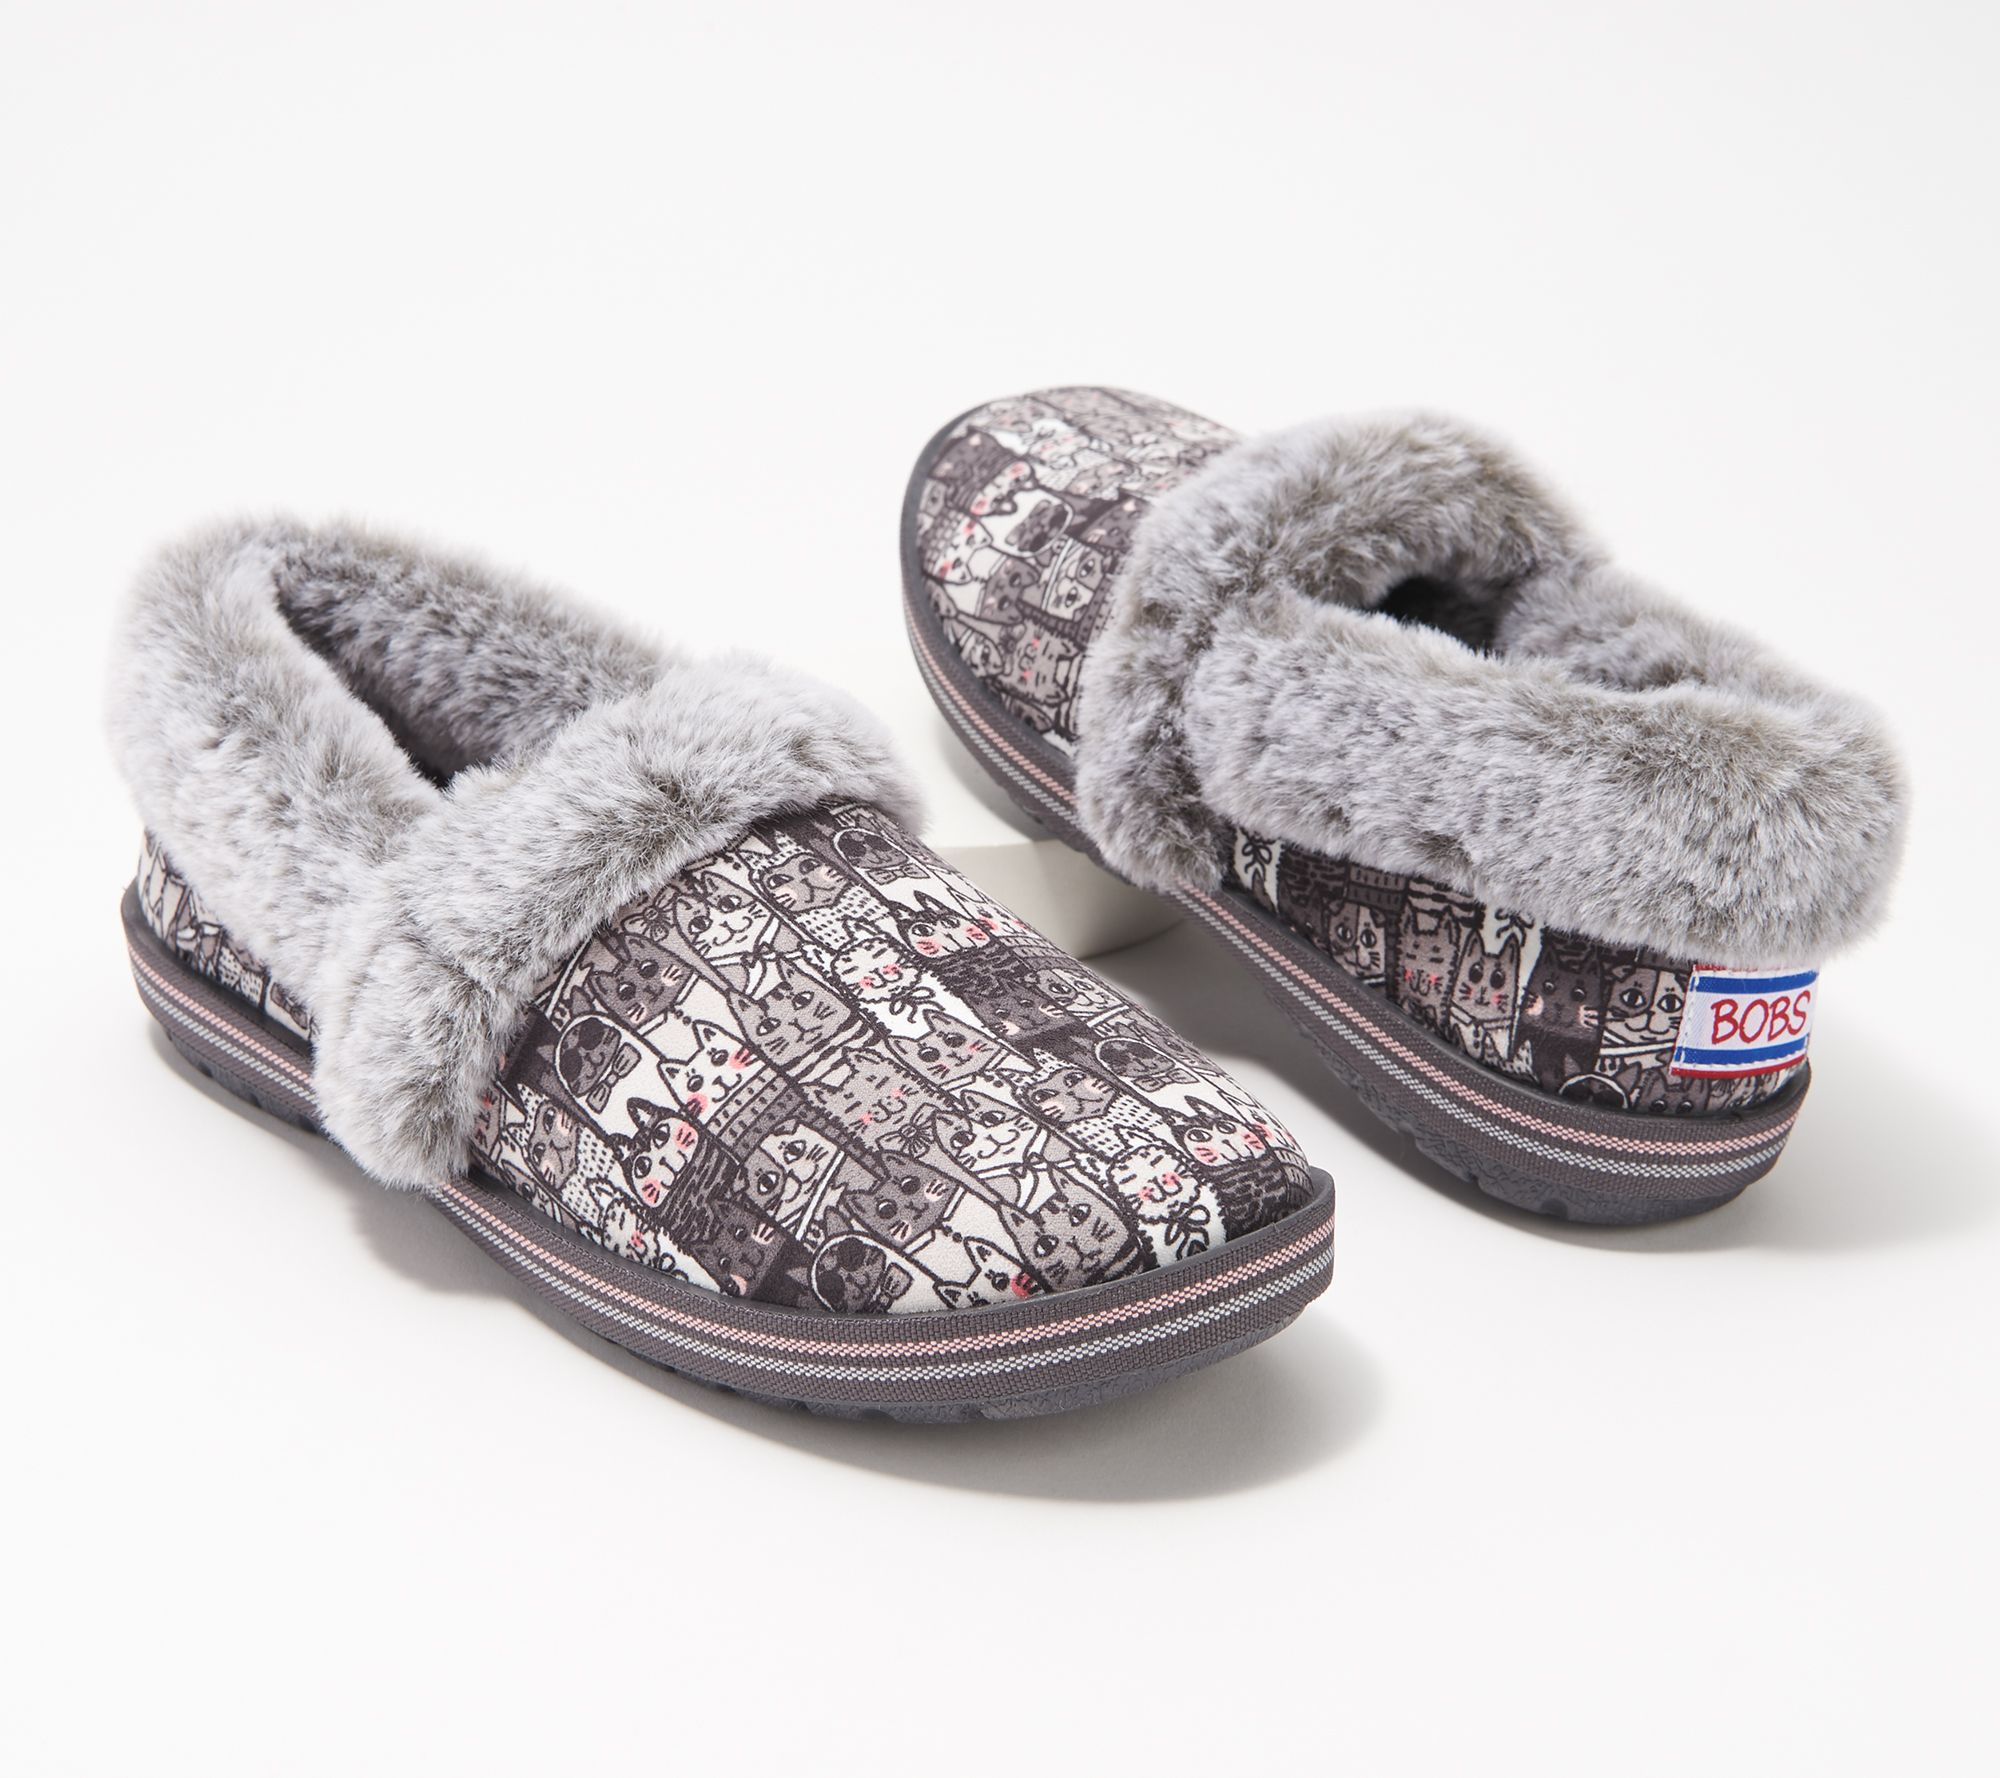 Skechers BOBS Too Cozy Slippers - Alley Cat - QVC.com